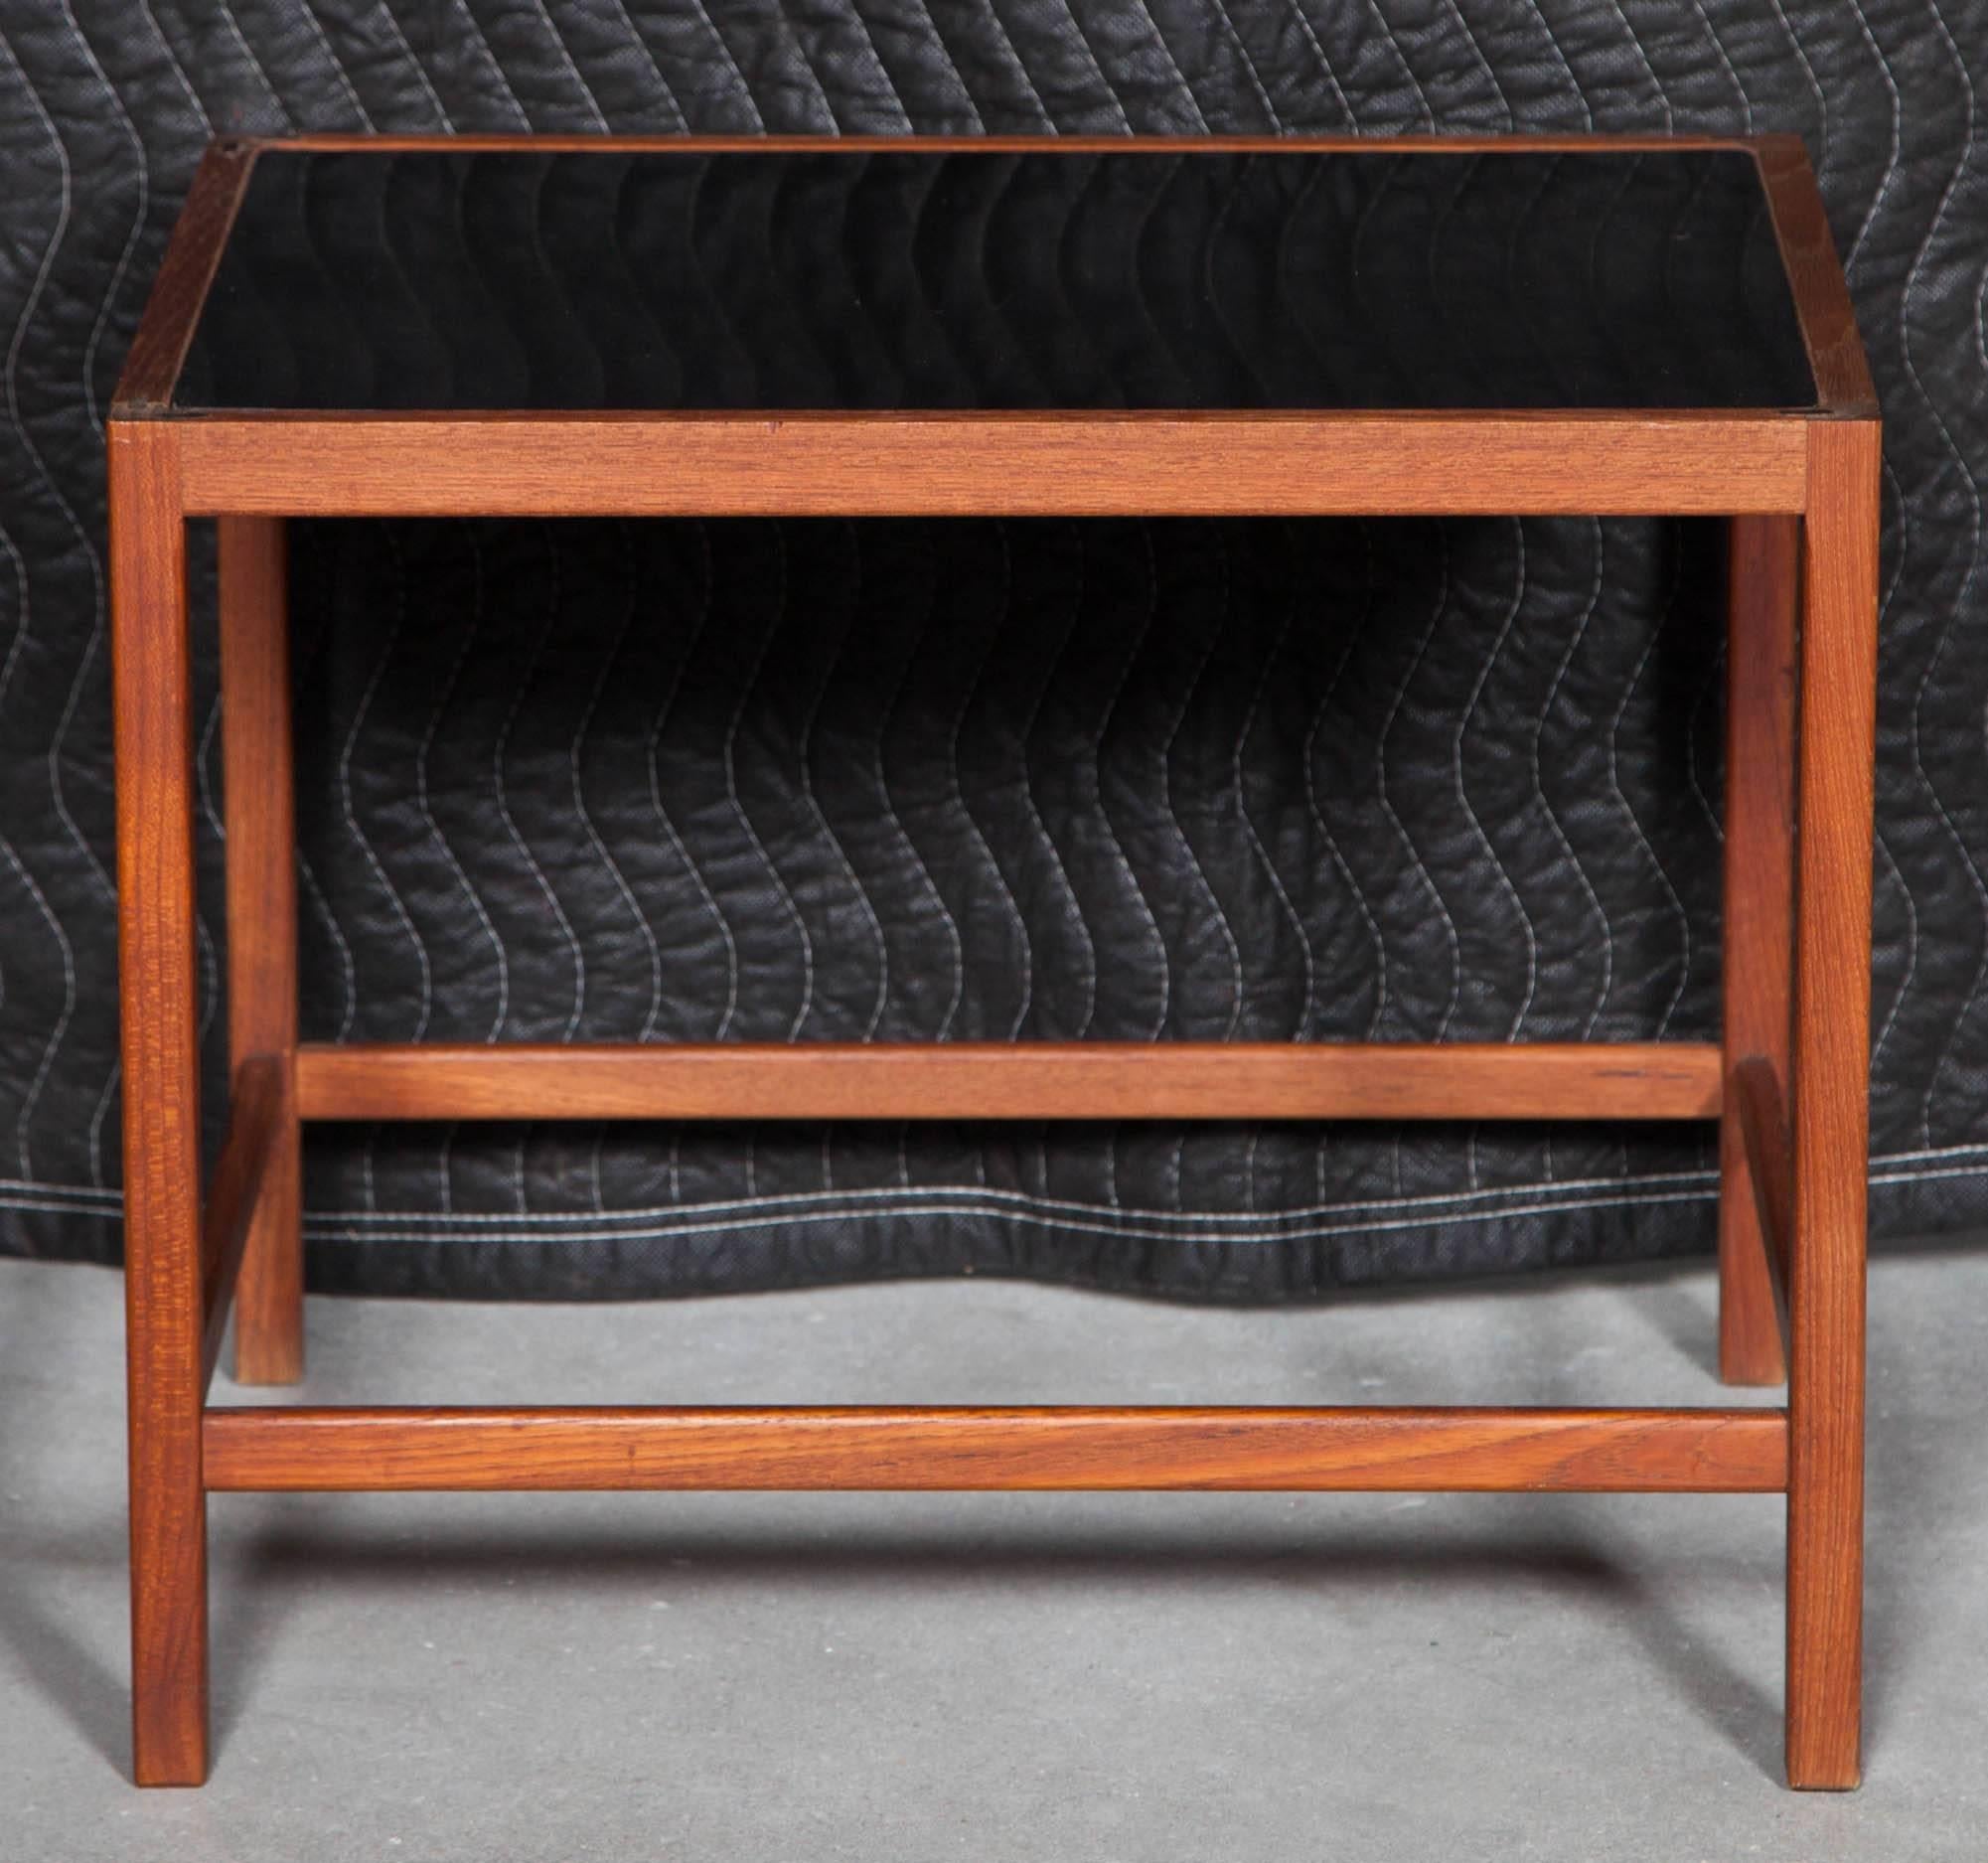 Vintage 1950s Accent Table with Black Laminate Top

This end table is in like-new condition and shows it's beautiful joinery. Simple classic design with warm teak frame. Ready for pick up, delivery, or shipping.